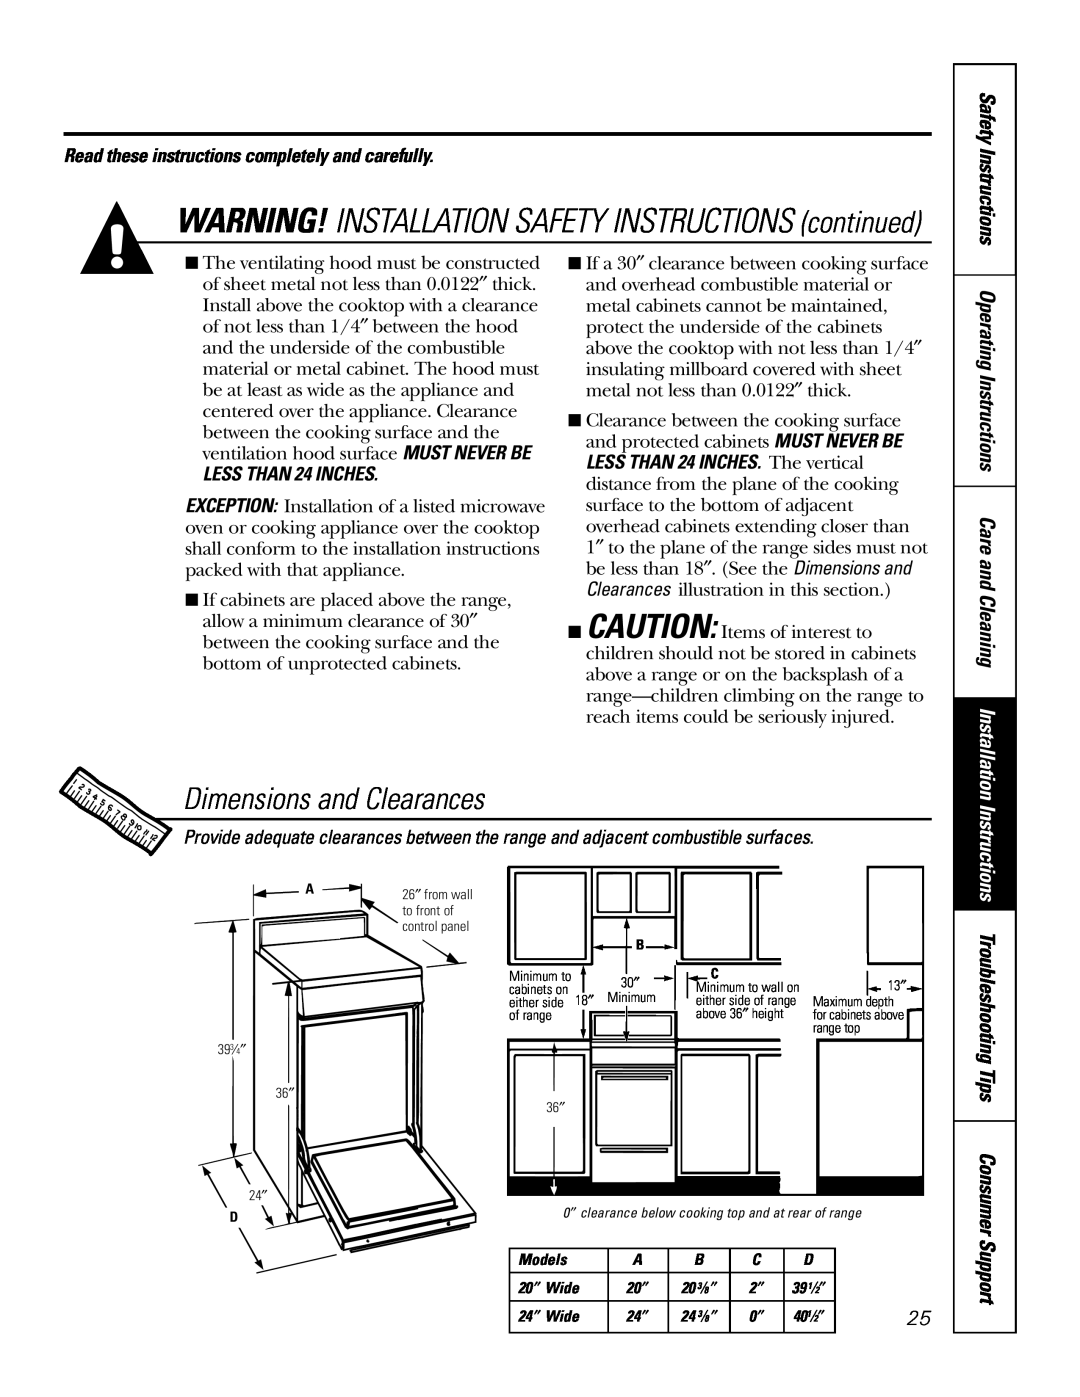 GE RGA624, RGA620 WARNING! INSTALLATION SAFETY INSTRUCTIONS continued, Dimensions and Clearances, LESS THAN 24 INCHES 